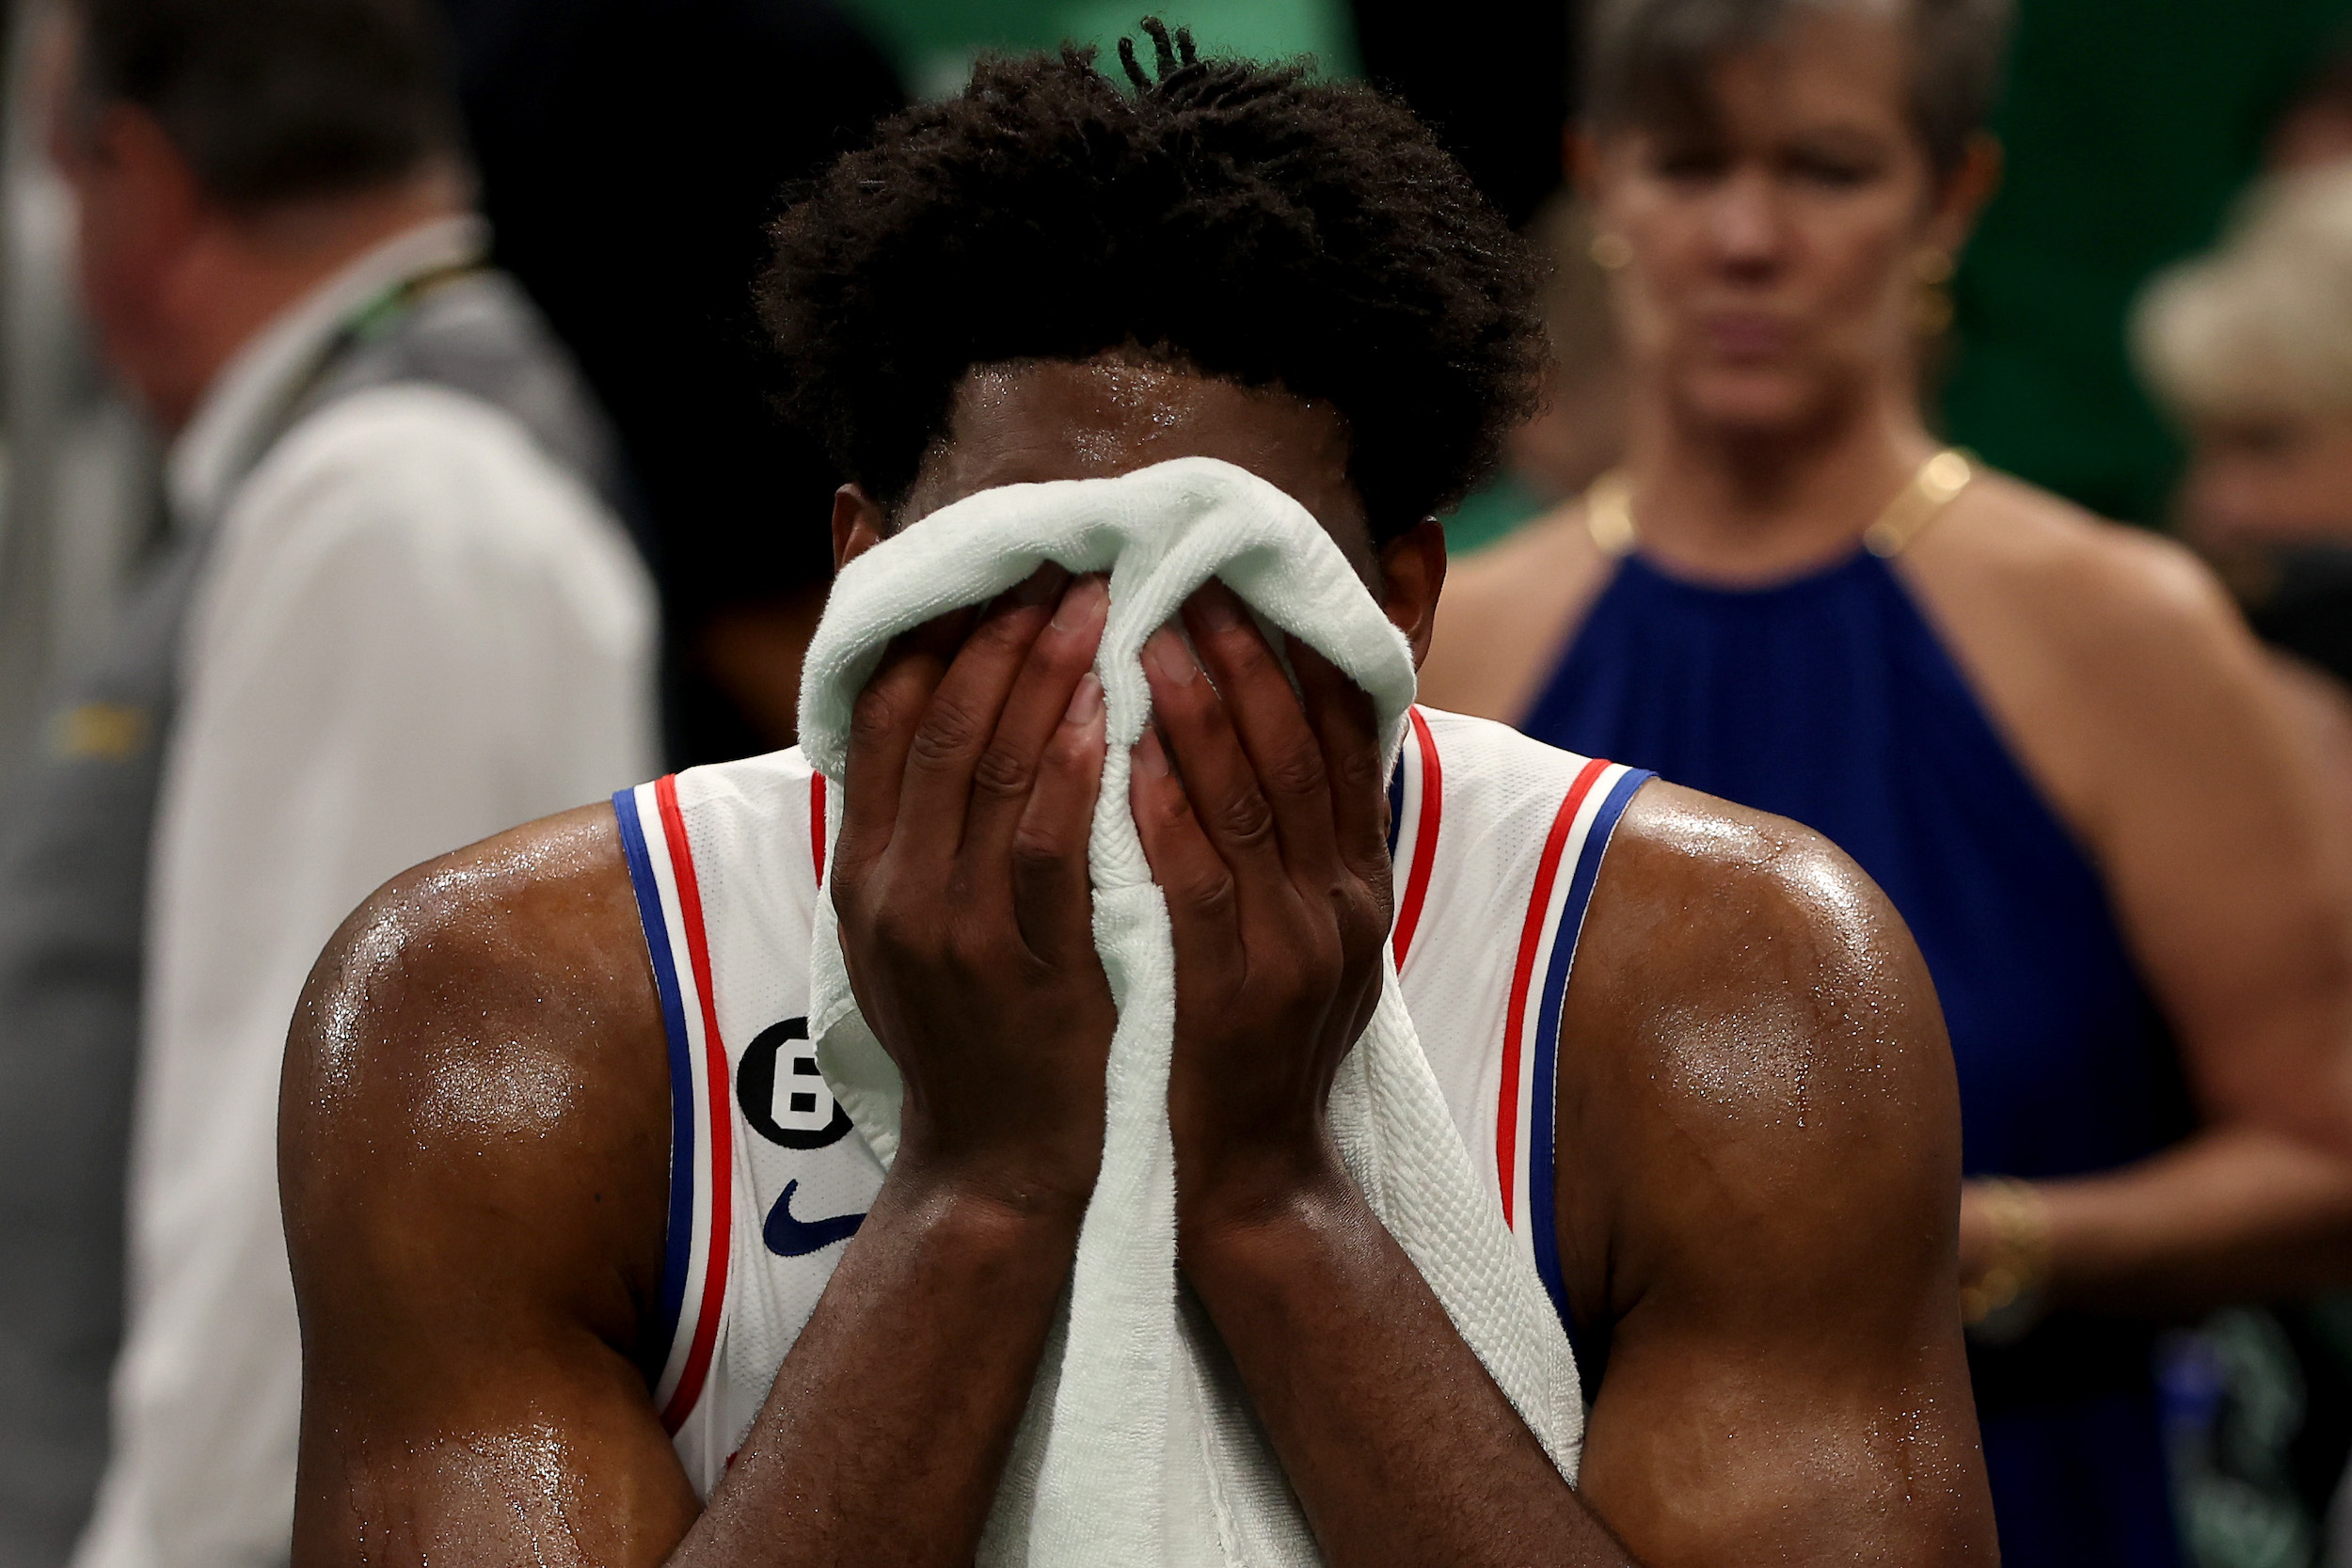 Joel Embiid covers his face with a towel.